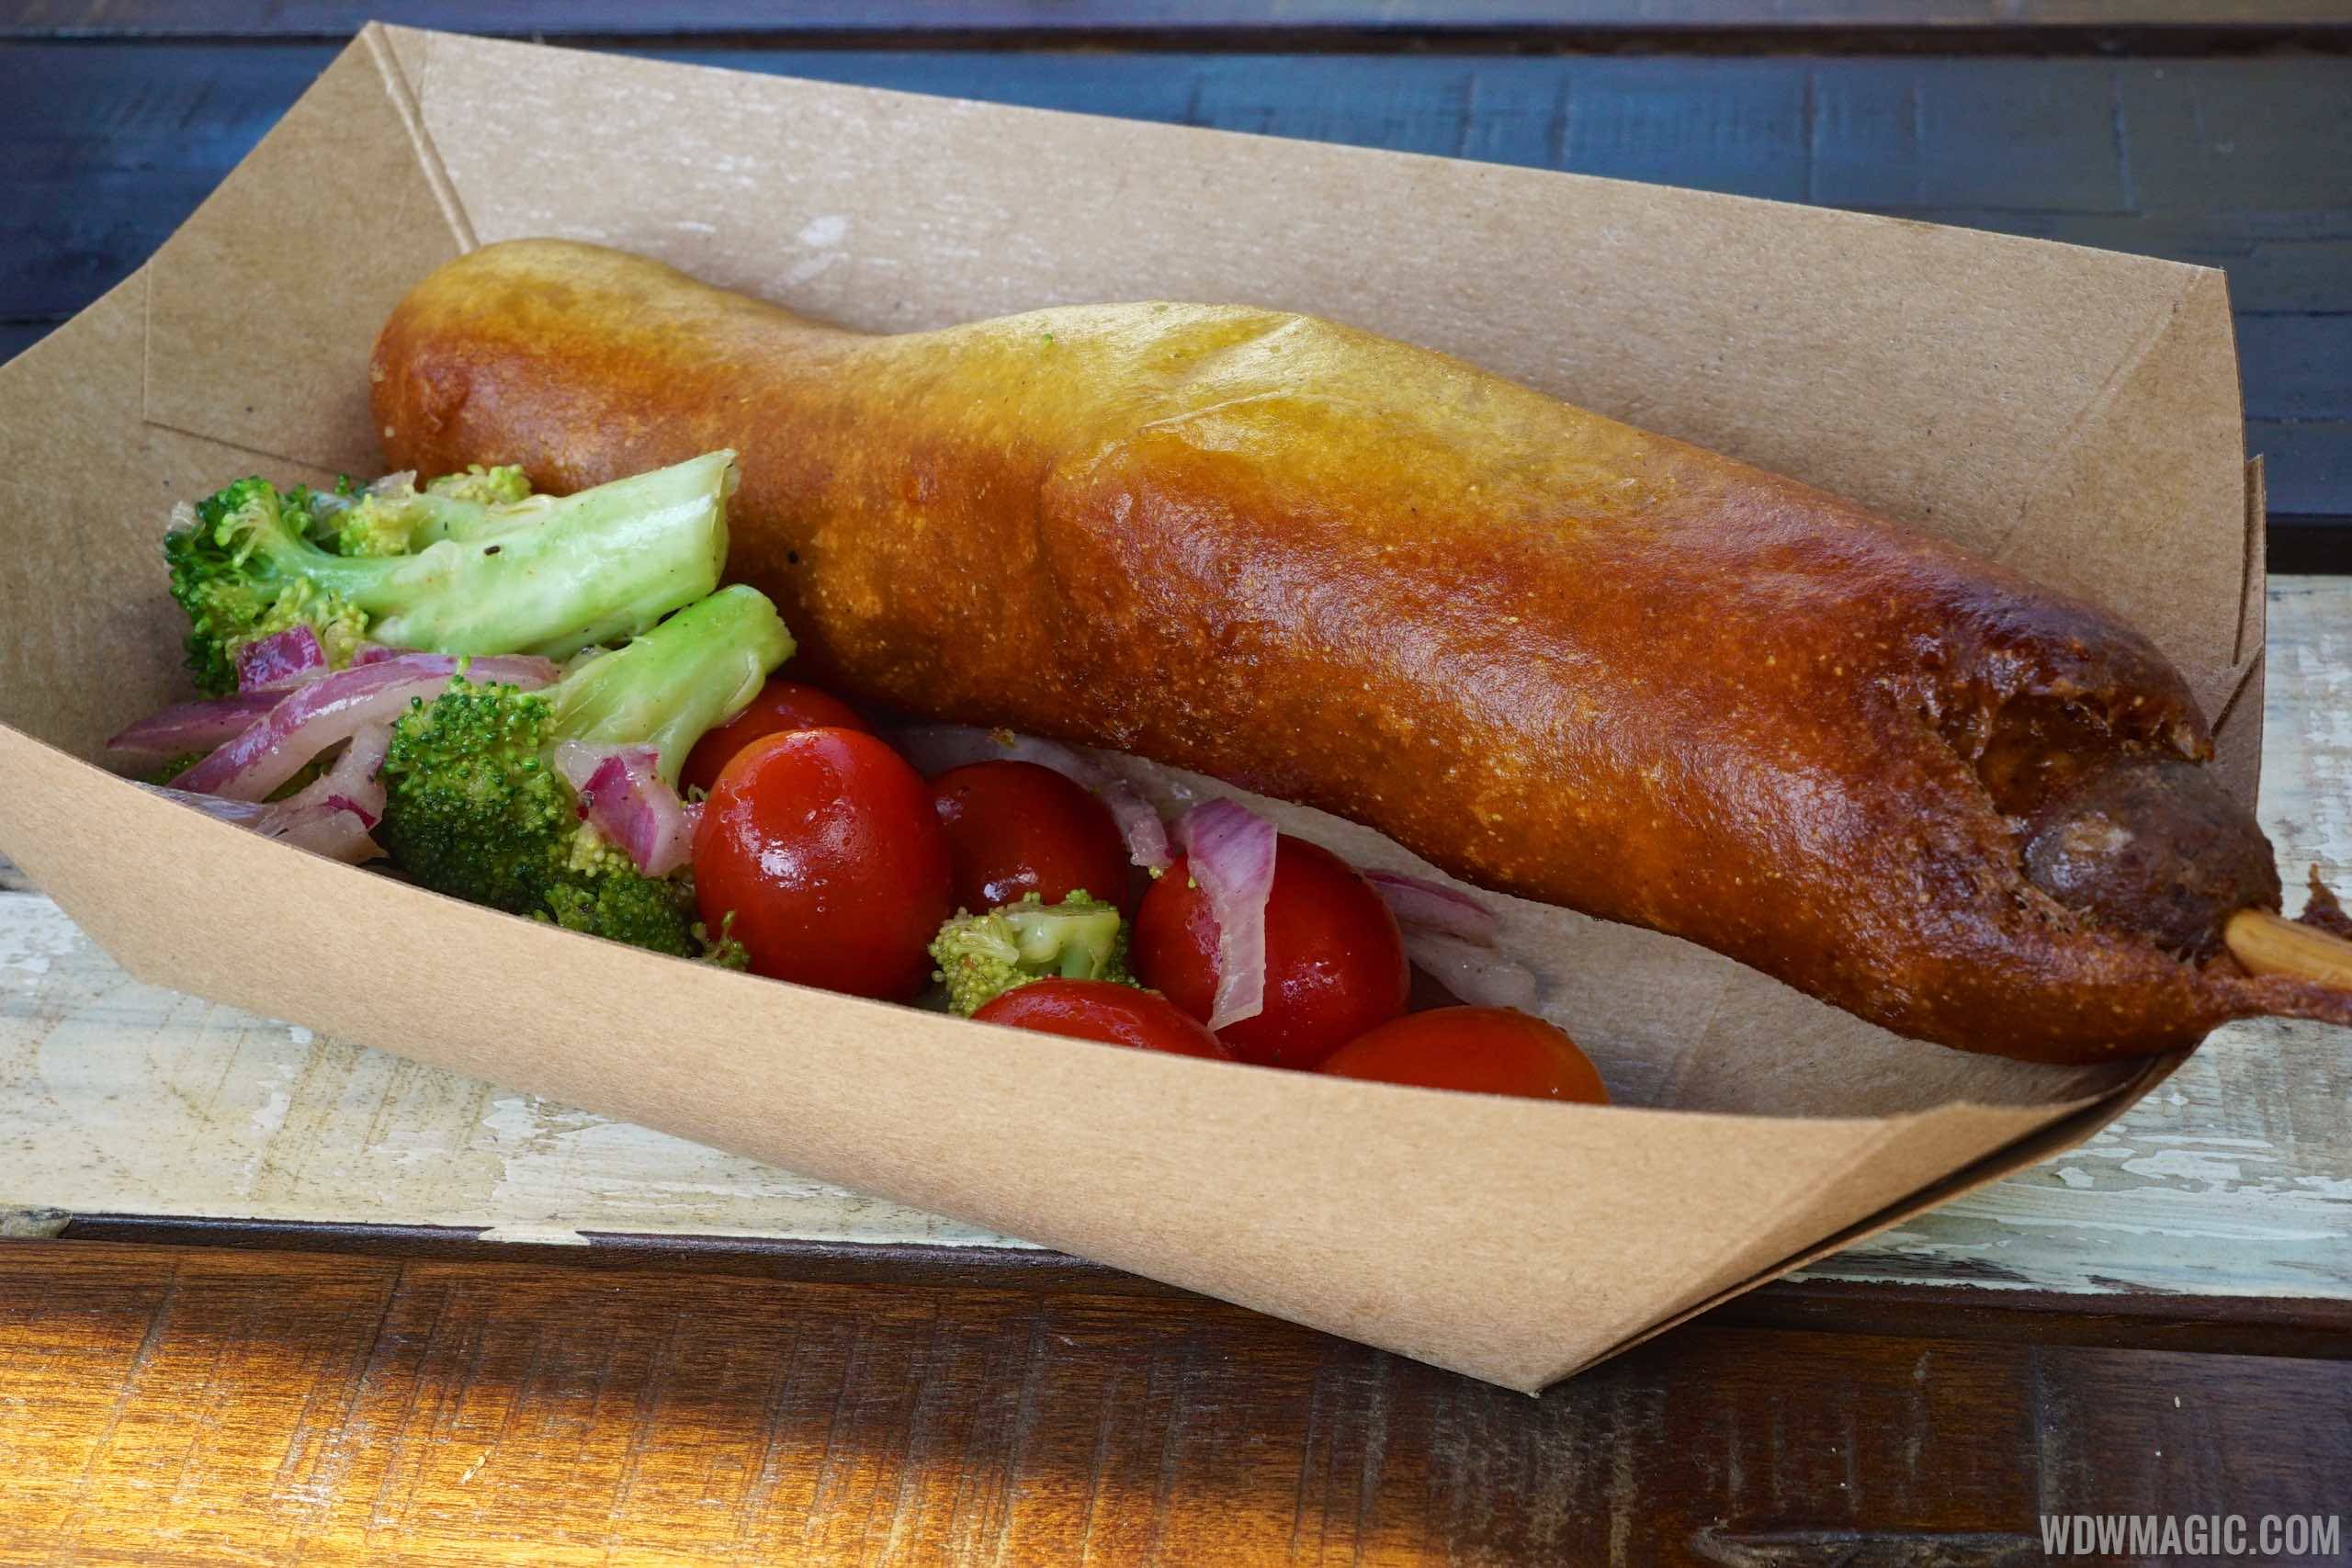 Harambe Market Food - Sausage fried in curried corn batter with roasted broccoli and tomato salad $8.99